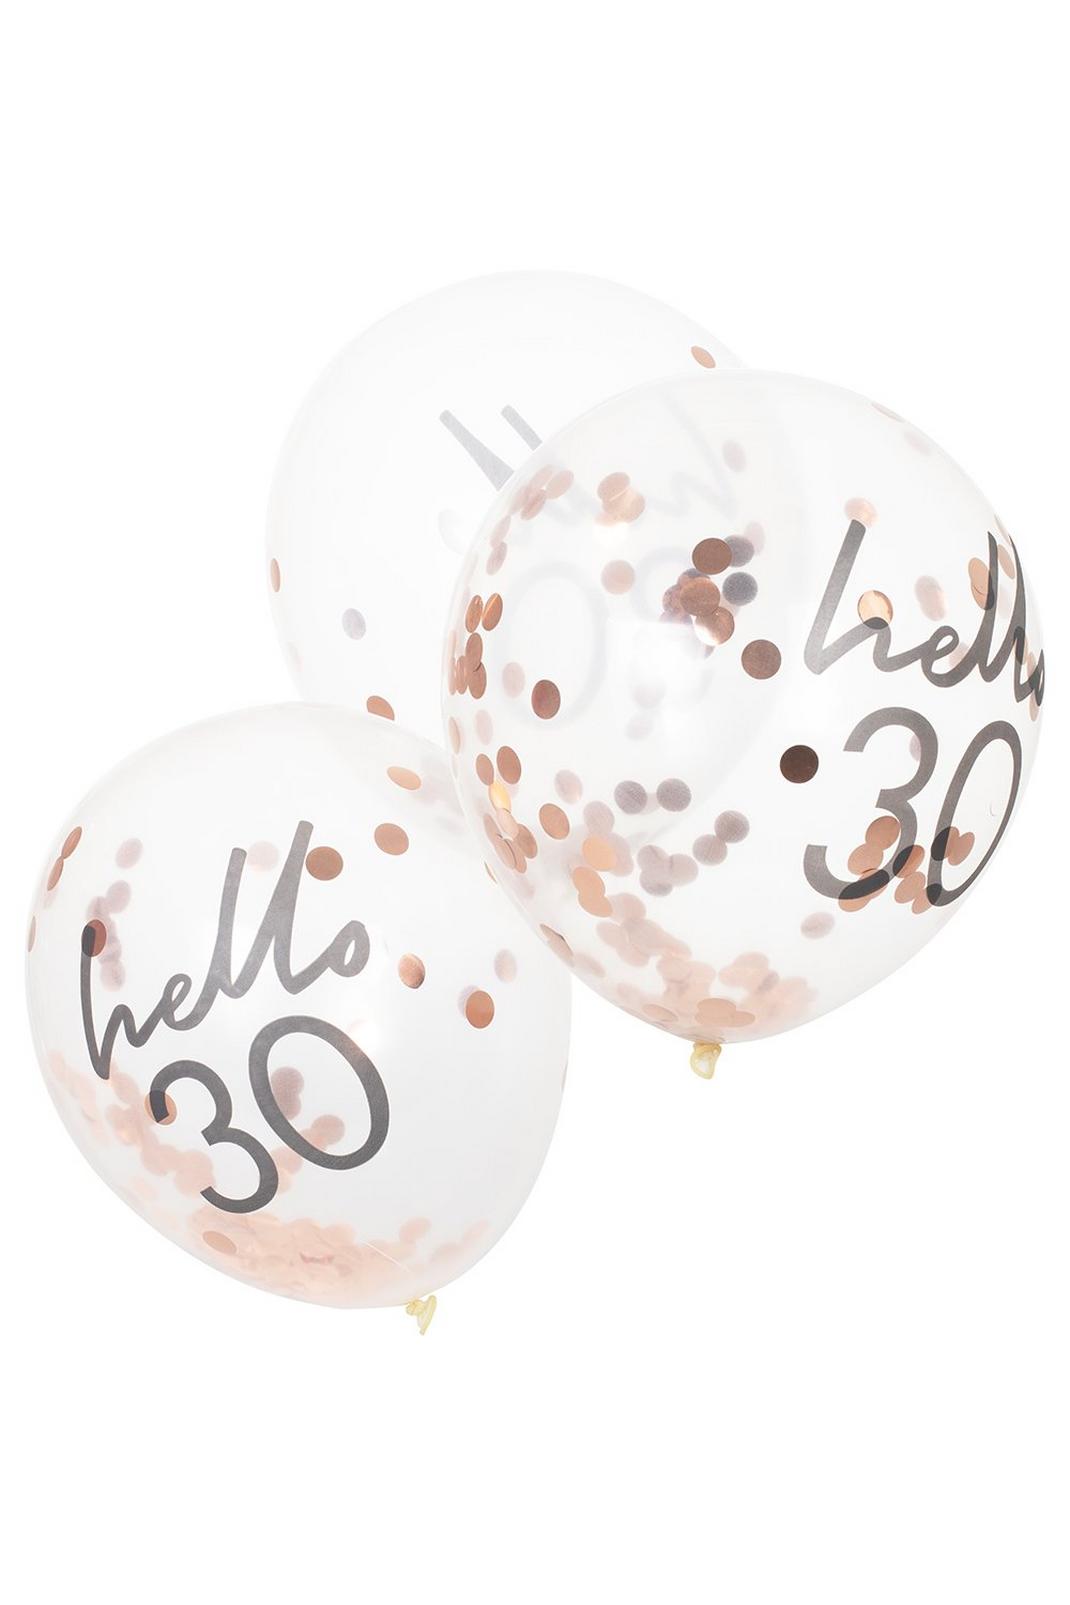 173 Ginger Ray Hello 30 Confetti Balloons image number 1